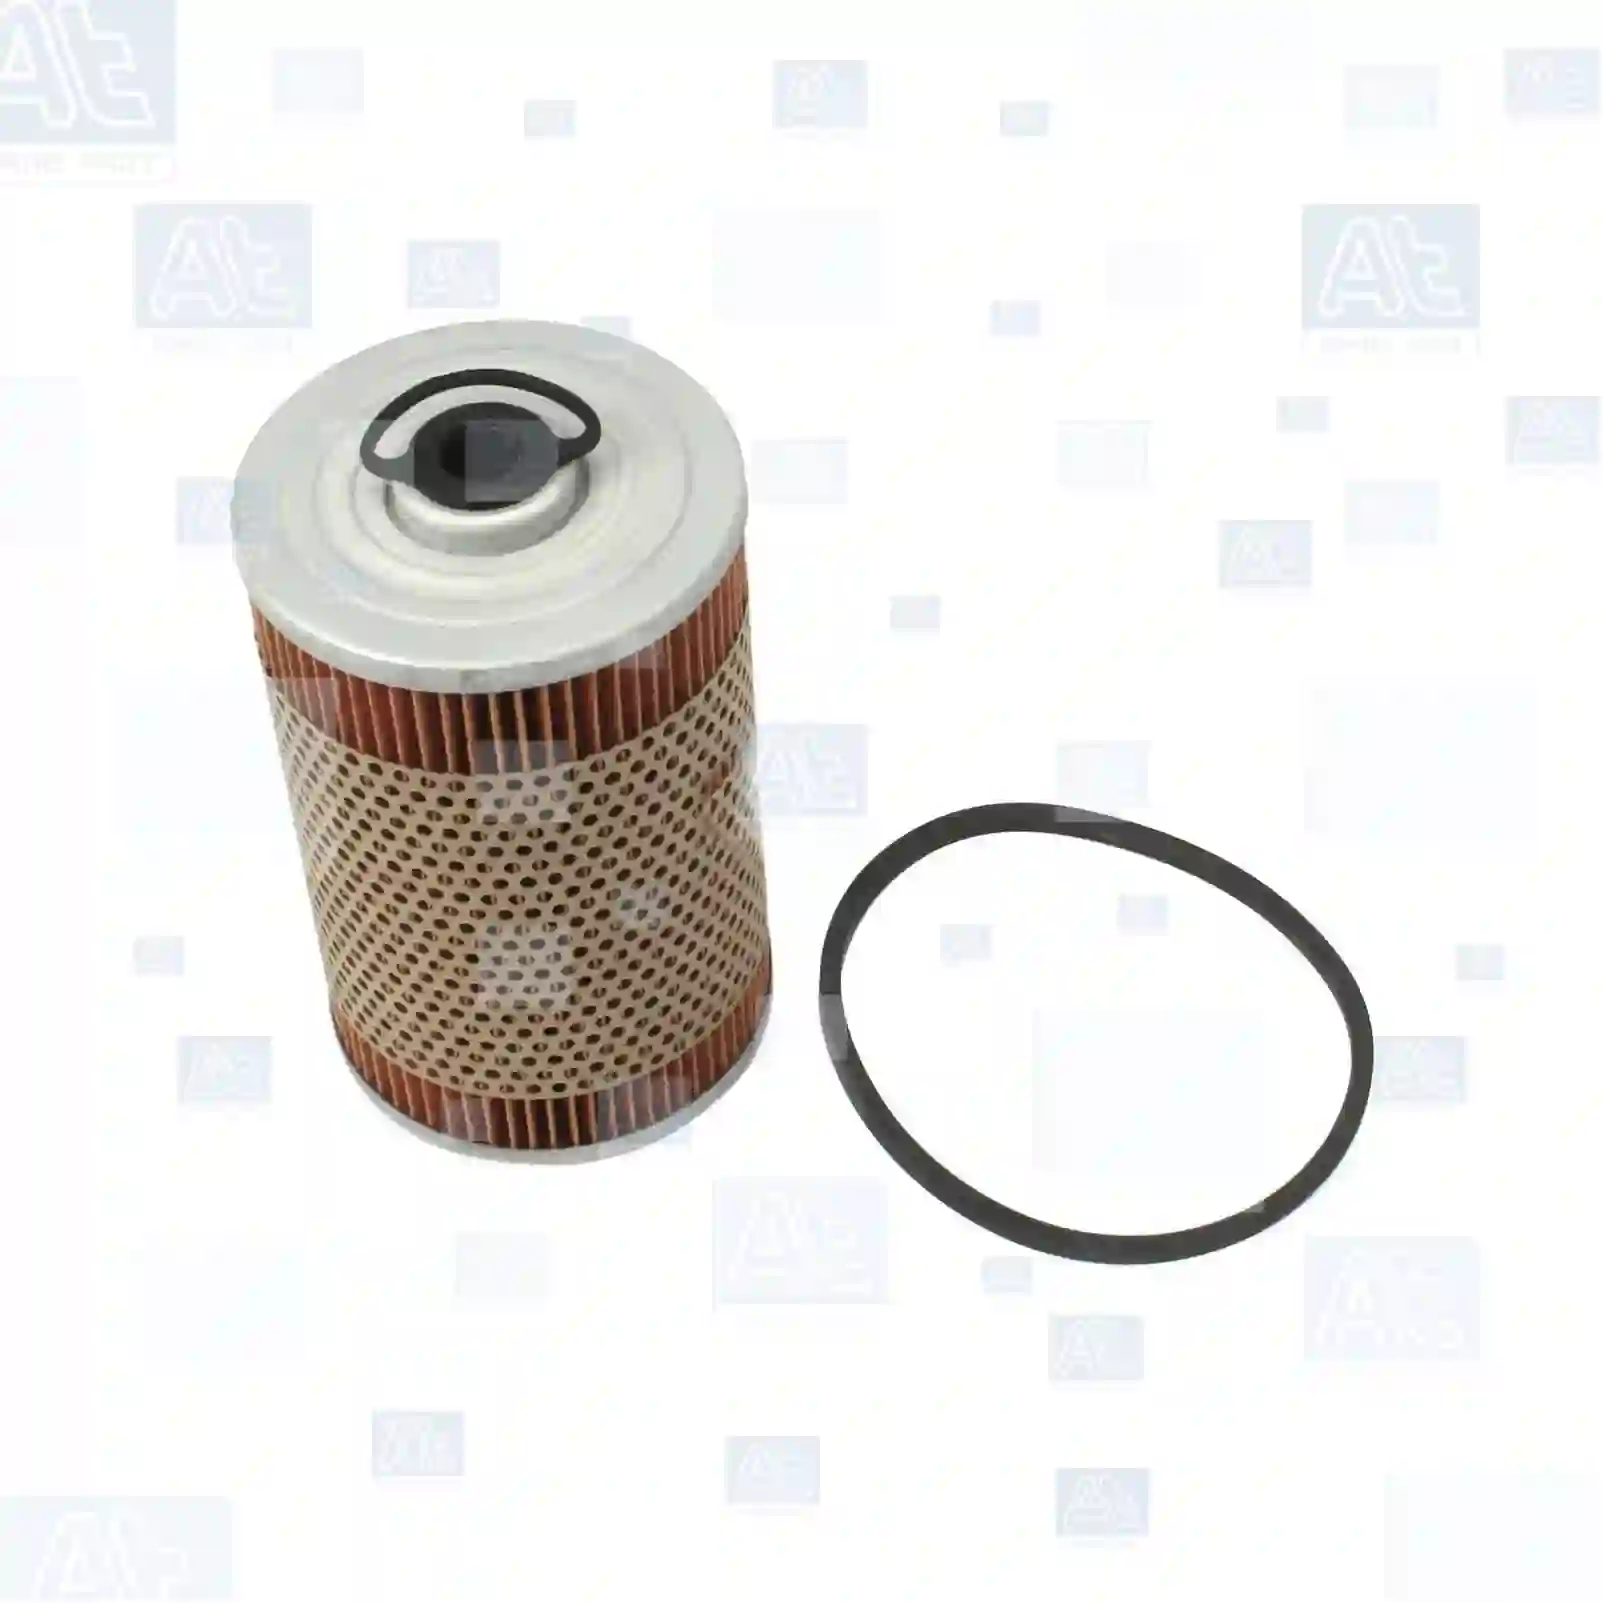 Fuel filter insert, 77723211, 80034701, 243327, 801150215, 801150237, 801151161, 801151163, 801160154, 801160157, 1133275R1, 244575R91, 3029244R91, 3029245, 3029245R91, 3032014R91, 3055272R91, 3055650, 3055650R91, 3056984R1, 3059244, 3059244R1, 3059245, 3059245R91, 3059245R92, 3132014R91, 3132015, 3132015R91, 3132015R92, 318887C92, 3I-1212, 6435477, 7984347, 7984348, 9975264, 0001330350, 0001330380, 0001330381, 133829, 1500447, 1500503, 265724, ABU8563, 649911, 76038600, 902705, 90270500, 01151305, 01161545, 01168396, 01168398, 01168399, 01175893, 01181061, 01289054, 09951241, 605401910001, 605411400003, 605411420005, 605411420012, 605411510003, 605412910006, 606906880101, 0794693, 0796293, 4702263, 4790226, 01160034, 82177074, 2852007, 7984348, 9307874, 25010638, 25012645, 7984347, 7984348, 9975284, 0009831606, 0004773115, 004774515, 2914107M1, 512593000, 513173000, 5894520700, 5894520800, 5984520700, 5984520800, 5984520900, 6260152271, X885984520700, 1168407, B405364, B605304A, 1133275R1, 244575R91, 3029245, 3029245R91, 3055230R91, 3055272R91, 3055650, 3055650R91, 3059244, 3059245, 3059245R91, 3059245R92, 3132015, 3132015R91, 3132015R92, 318887C92, 6-11070620-1, 6-11070620-2, 6-11073613-0, 24152004, 24866064, 42522696, AT253935, 06502115, 06538215, 38215, 40600169, 40700148, 40700306, 01168398, 01175893, 01181061, 01289054, 09951241, 90951241, F542, F543, F599, 7999921099, 08508111, 5502259, 5502263, 5502268, 7001222, 11225042015, 81000000246, 81125030011, 81125030018, 81125030021, 81125030022, 81125030024, 81125030042, 81125030046, 81125030048, 81125030053, 81125030054, 81125030062, 81125030063, 81125030064, 81125030066, 81125030076, N1014015571, 133602C0, 1818471M1, 2914220M1, 0002105100, 0004773115, 0004773515, 0004774015, 0004774515, 0004777215, 0004777515, 3214770015, 3440927045, 3440927405, 3554700092, 3554700192, 4220920051, 8319101190, 9455080200, 4730200134, 01175893, 605410220038, 605411400003, 605411420005, 605411420012, 605412910006, 606906880101, 905411510003, 9455080200, 801151161, 801160154, 801160157, 0150578, 150578, 50578, 8888622, D8888622, 0003005826, 5984520700, 133829, 245301, 265724, 5502259, 78120, 78245, 78709, 00107800, 00107807, 8508111, 152875, 62325, 5894520800, 83191011190, 8319101200, 83191261610, 185550065, 185550066, 540208001B01, 540208001BO1, 540208001BO2, 5402080B01, 5402080B02, 614080739, 614080740, 614090739, 4011024630, 215450, 4531012, 3201438, 233897, 243619, 2528215, 3815857, 74406, 76649, 140518714, 6206R109 ||  77723211 At Spare Part | Engine, Accelerator Pedal, Camshaft, Connecting Rod, Crankcase, Crankshaft, Cylinder Head, Engine Suspension Mountings, Exhaust Manifold, Exhaust Gas Recirculation, Filter Kits, Flywheel Housing, General Overhaul Kits, Engine, Intake Manifold, Oil Cleaner, Oil Cooler, Oil Filter, Oil Pump, Oil Sump, Piston & Liner, Sensor & Switch, Timing Case, Turbocharger, Cooling System, Belt Tensioner, Coolant Filter, Coolant Pipe, Corrosion Prevention Agent, Drive, Expansion Tank, Fan, Intercooler, Monitors & Gauges, Radiator, Thermostat, V-Belt / Timing belt, Water Pump, Fuel System, Electronical Injector Unit, Feed Pump, Fuel Filter, cpl., Fuel Gauge Sender,  Fuel Line, Fuel Pump, Fuel Tank, Injection Line Kit, Injection Pump, Exhaust System, Clutch & Pedal, Gearbox, Propeller Shaft, Axles, Brake System, Hubs & Wheels, Suspension, Leaf Spring, Universal Parts / Accessories, Steering, Electrical System, Cabin Fuel filter insert, 77723211, 80034701, 243327, 801150215, 801150237, 801151161, 801151163, 801160154, 801160157, 1133275R1, 244575R91, 3029244R91, 3029245, 3029245R91, 3032014R91, 3055272R91, 3055650, 3055650R91, 3056984R1, 3059244, 3059244R1, 3059245, 3059245R91, 3059245R92, 3132014R91, 3132015, 3132015R91, 3132015R92, 318887C92, 3I-1212, 6435477, 7984347, 7984348, 9975264, 0001330350, 0001330380, 0001330381, 133829, 1500447, 1500503, 265724, ABU8563, 649911, 76038600, 902705, 90270500, 01151305, 01161545, 01168396, 01168398, 01168399, 01175893, 01181061, 01289054, 09951241, 605401910001, 605411400003, 605411420005, 605411420012, 605411510003, 605412910006, 606906880101, 0794693, 0796293, 4702263, 4790226, 01160034, 82177074, 2852007, 7984348, 9307874, 25010638, 25012645, 7984347, 7984348, 9975284, 0009831606, 0004773115, 004774515, 2914107M1, 512593000, 513173000, 5894520700, 5894520800, 5984520700, 5984520800, 5984520900, 6260152271, X885984520700, 1168407, B405364, B605304A, 1133275R1, 244575R91, 3029245, 3029245R91, 3055230R91, 3055272R91, 3055650, 3055650R91, 3059244, 3059245, 3059245R91, 3059245R92, 3132015, 3132015R91, 3132015R92, 318887C92, 6-11070620-1, 6-11070620-2, 6-11073613-0, 24152004, 24866064, 42522696, AT253935, 06502115, 06538215, 38215, 40600169, 40700148, 40700306, 01168398, 01175893, 01181061, 01289054, 09951241, 90951241, F542, F543, F599, 7999921099, 08508111, 5502259, 5502263, 5502268, 7001222, 11225042015, 81000000246, 81125030011, 81125030018, 81125030021, 81125030022, 81125030024, 81125030042, 81125030046, 81125030048, 81125030053, 81125030054, 81125030062, 81125030063, 81125030064, 81125030066, 81125030076, N1014015571, 133602C0, 1818471M1, 2914220M1, 0002105100, 0004773115, 0004773515, 0004774015, 0004774515, 0004777215, 0004777515, 3214770015, 3440927045, 3440927405, 3554700092, 3554700192, 4220920051, 8319101190, 9455080200, 4730200134, 01175893, 605410220038, 605411400003, 605411420005, 605411420012, 605412910006, 606906880101, 905411510003, 9455080200, 801151161, 801160154, 801160157, 0150578, 150578, 50578, 8888622, D8888622, 0003005826, 5984520700, 133829, 245301, 265724, 5502259, 78120, 78245, 78709, 00107800, 00107807, 8508111, 152875, 62325, 5894520800, 83191011190, 8319101200, 83191261610, 185550065, 185550066, 540208001B01, 540208001BO1, 540208001BO2, 5402080B01, 5402080B02, 614080739, 614080740, 614090739, 4011024630, 215450, 4531012, 3201438, 233897, 243619, 2528215, 3815857, 74406, 76649, 140518714, 6206R109 ||  77723211 At Spare Part | Engine, Accelerator Pedal, Camshaft, Connecting Rod, Crankcase, Crankshaft, Cylinder Head, Engine Suspension Mountings, Exhaust Manifold, Exhaust Gas Recirculation, Filter Kits, Flywheel Housing, General Overhaul Kits, Engine, Intake Manifold, Oil Cleaner, Oil Cooler, Oil Filter, Oil Pump, Oil Sump, Piston & Liner, Sensor & Switch, Timing Case, Turbocharger, Cooling System, Belt Tensioner, Coolant Filter, Coolant Pipe, Corrosion Prevention Agent, Drive, Expansion Tank, Fan, Intercooler, Monitors & Gauges, Radiator, Thermostat, V-Belt / Timing belt, Water Pump, Fuel System, Electronical Injector Unit, Feed Pump, Fuel Filter, cpl., Fuel Gauge Sender,  Fuel Line, Fuel Pump, Fuel Tank, Injection Line Kit, Injection Pump, Exhaust System, Clutch & Pedal, Gearbox, Propeller Shaft, Axles, Brake System, Hubs & Wheels, Suspension, Leaf Spring, Universal Parts / Accessories, Steering, Electrical System, Cabin